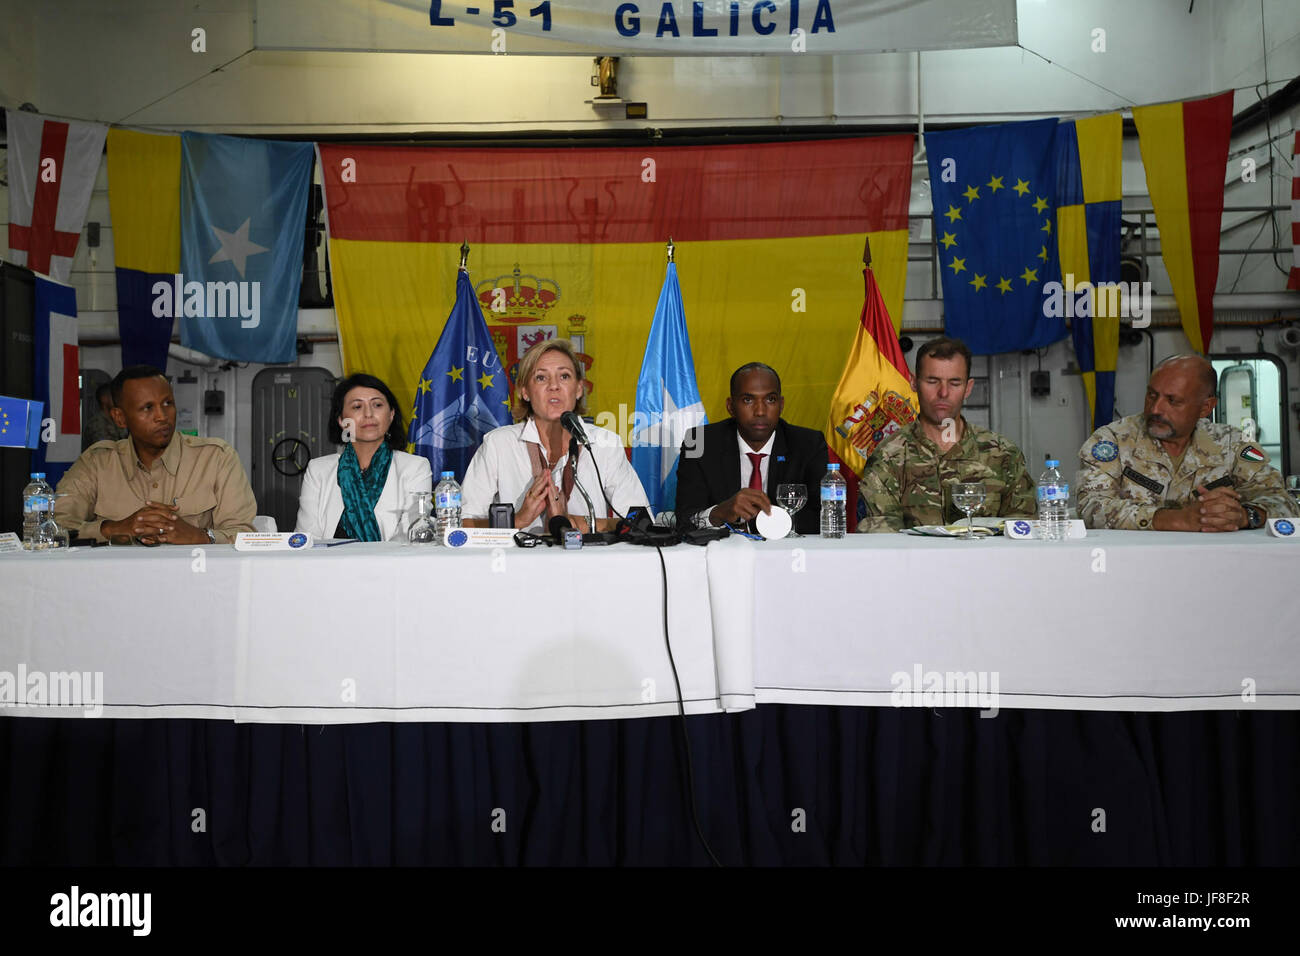 Veronique Lorenzo, the European Union (EU) Ambassador to Somalia, (third from left) addresses journalists during a press conference aboard the EU Naval Force flagship ESPS Galicia, off the coast of Somalia on May 8, 2017. The EU Naval Force is engaged in counter-piracy operations in the Indian Ocean. AMISOM photo / Omar Abdisalan Stock Photo